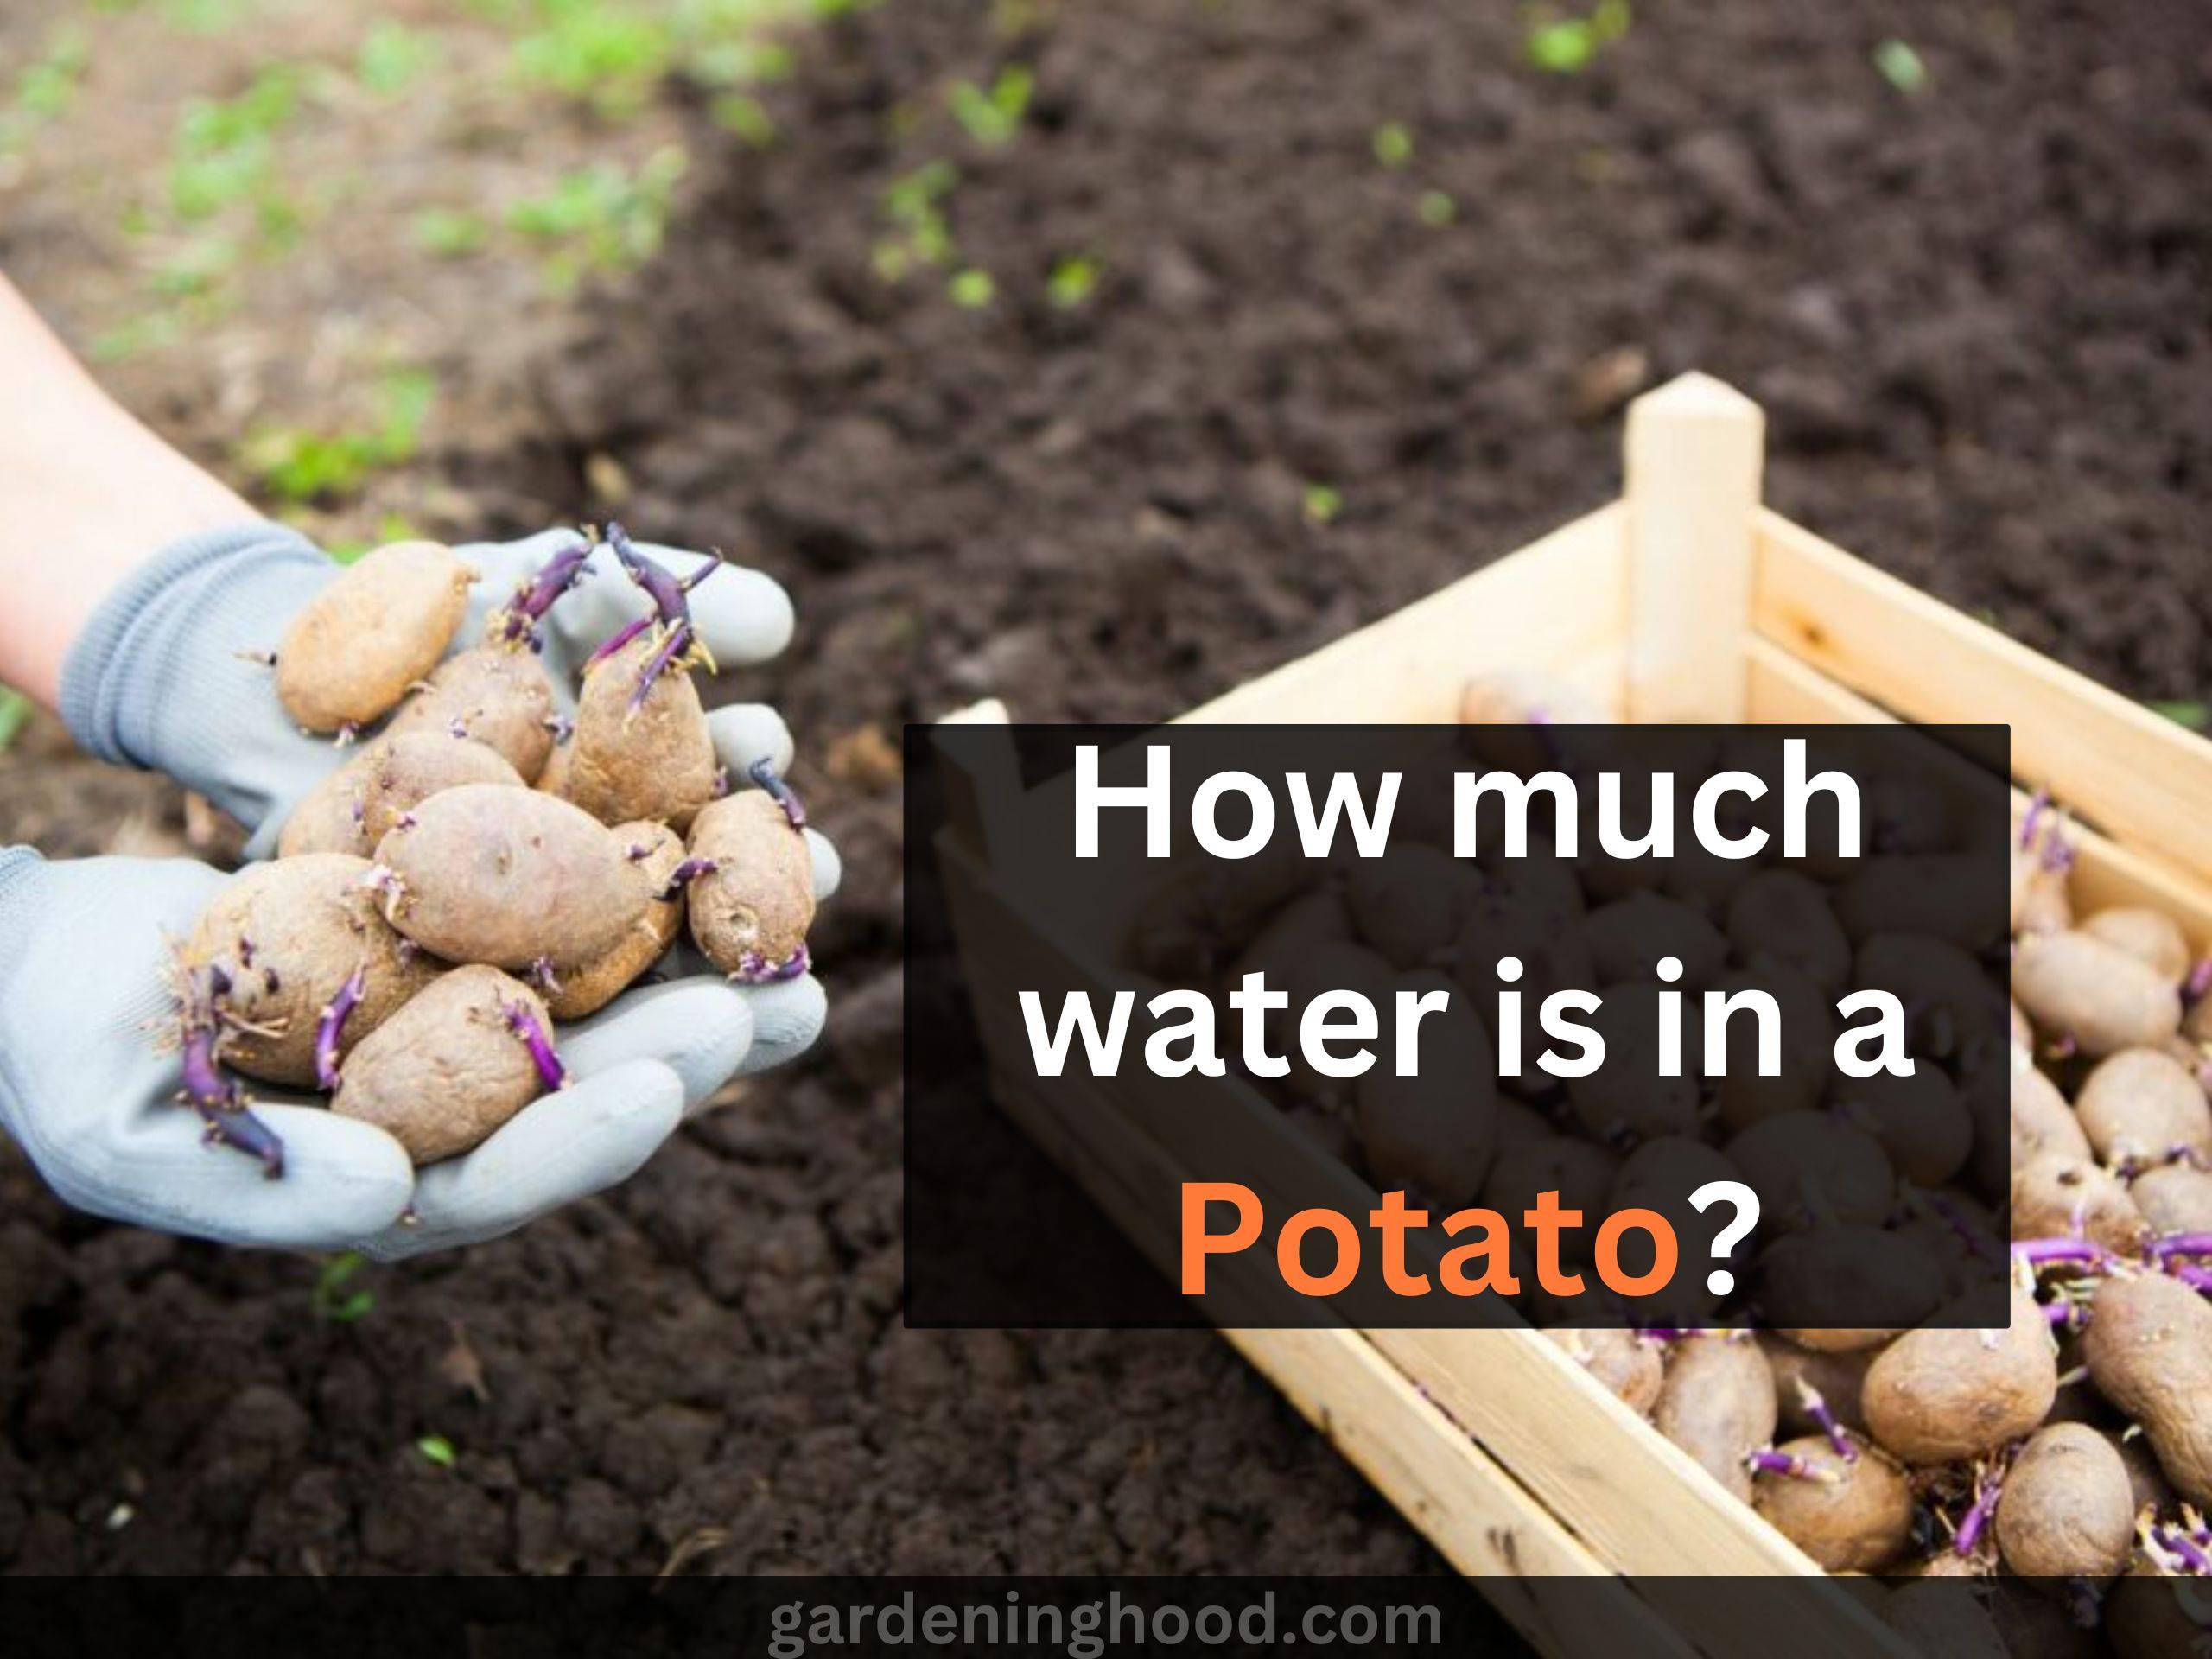 How much water is in a Potato?